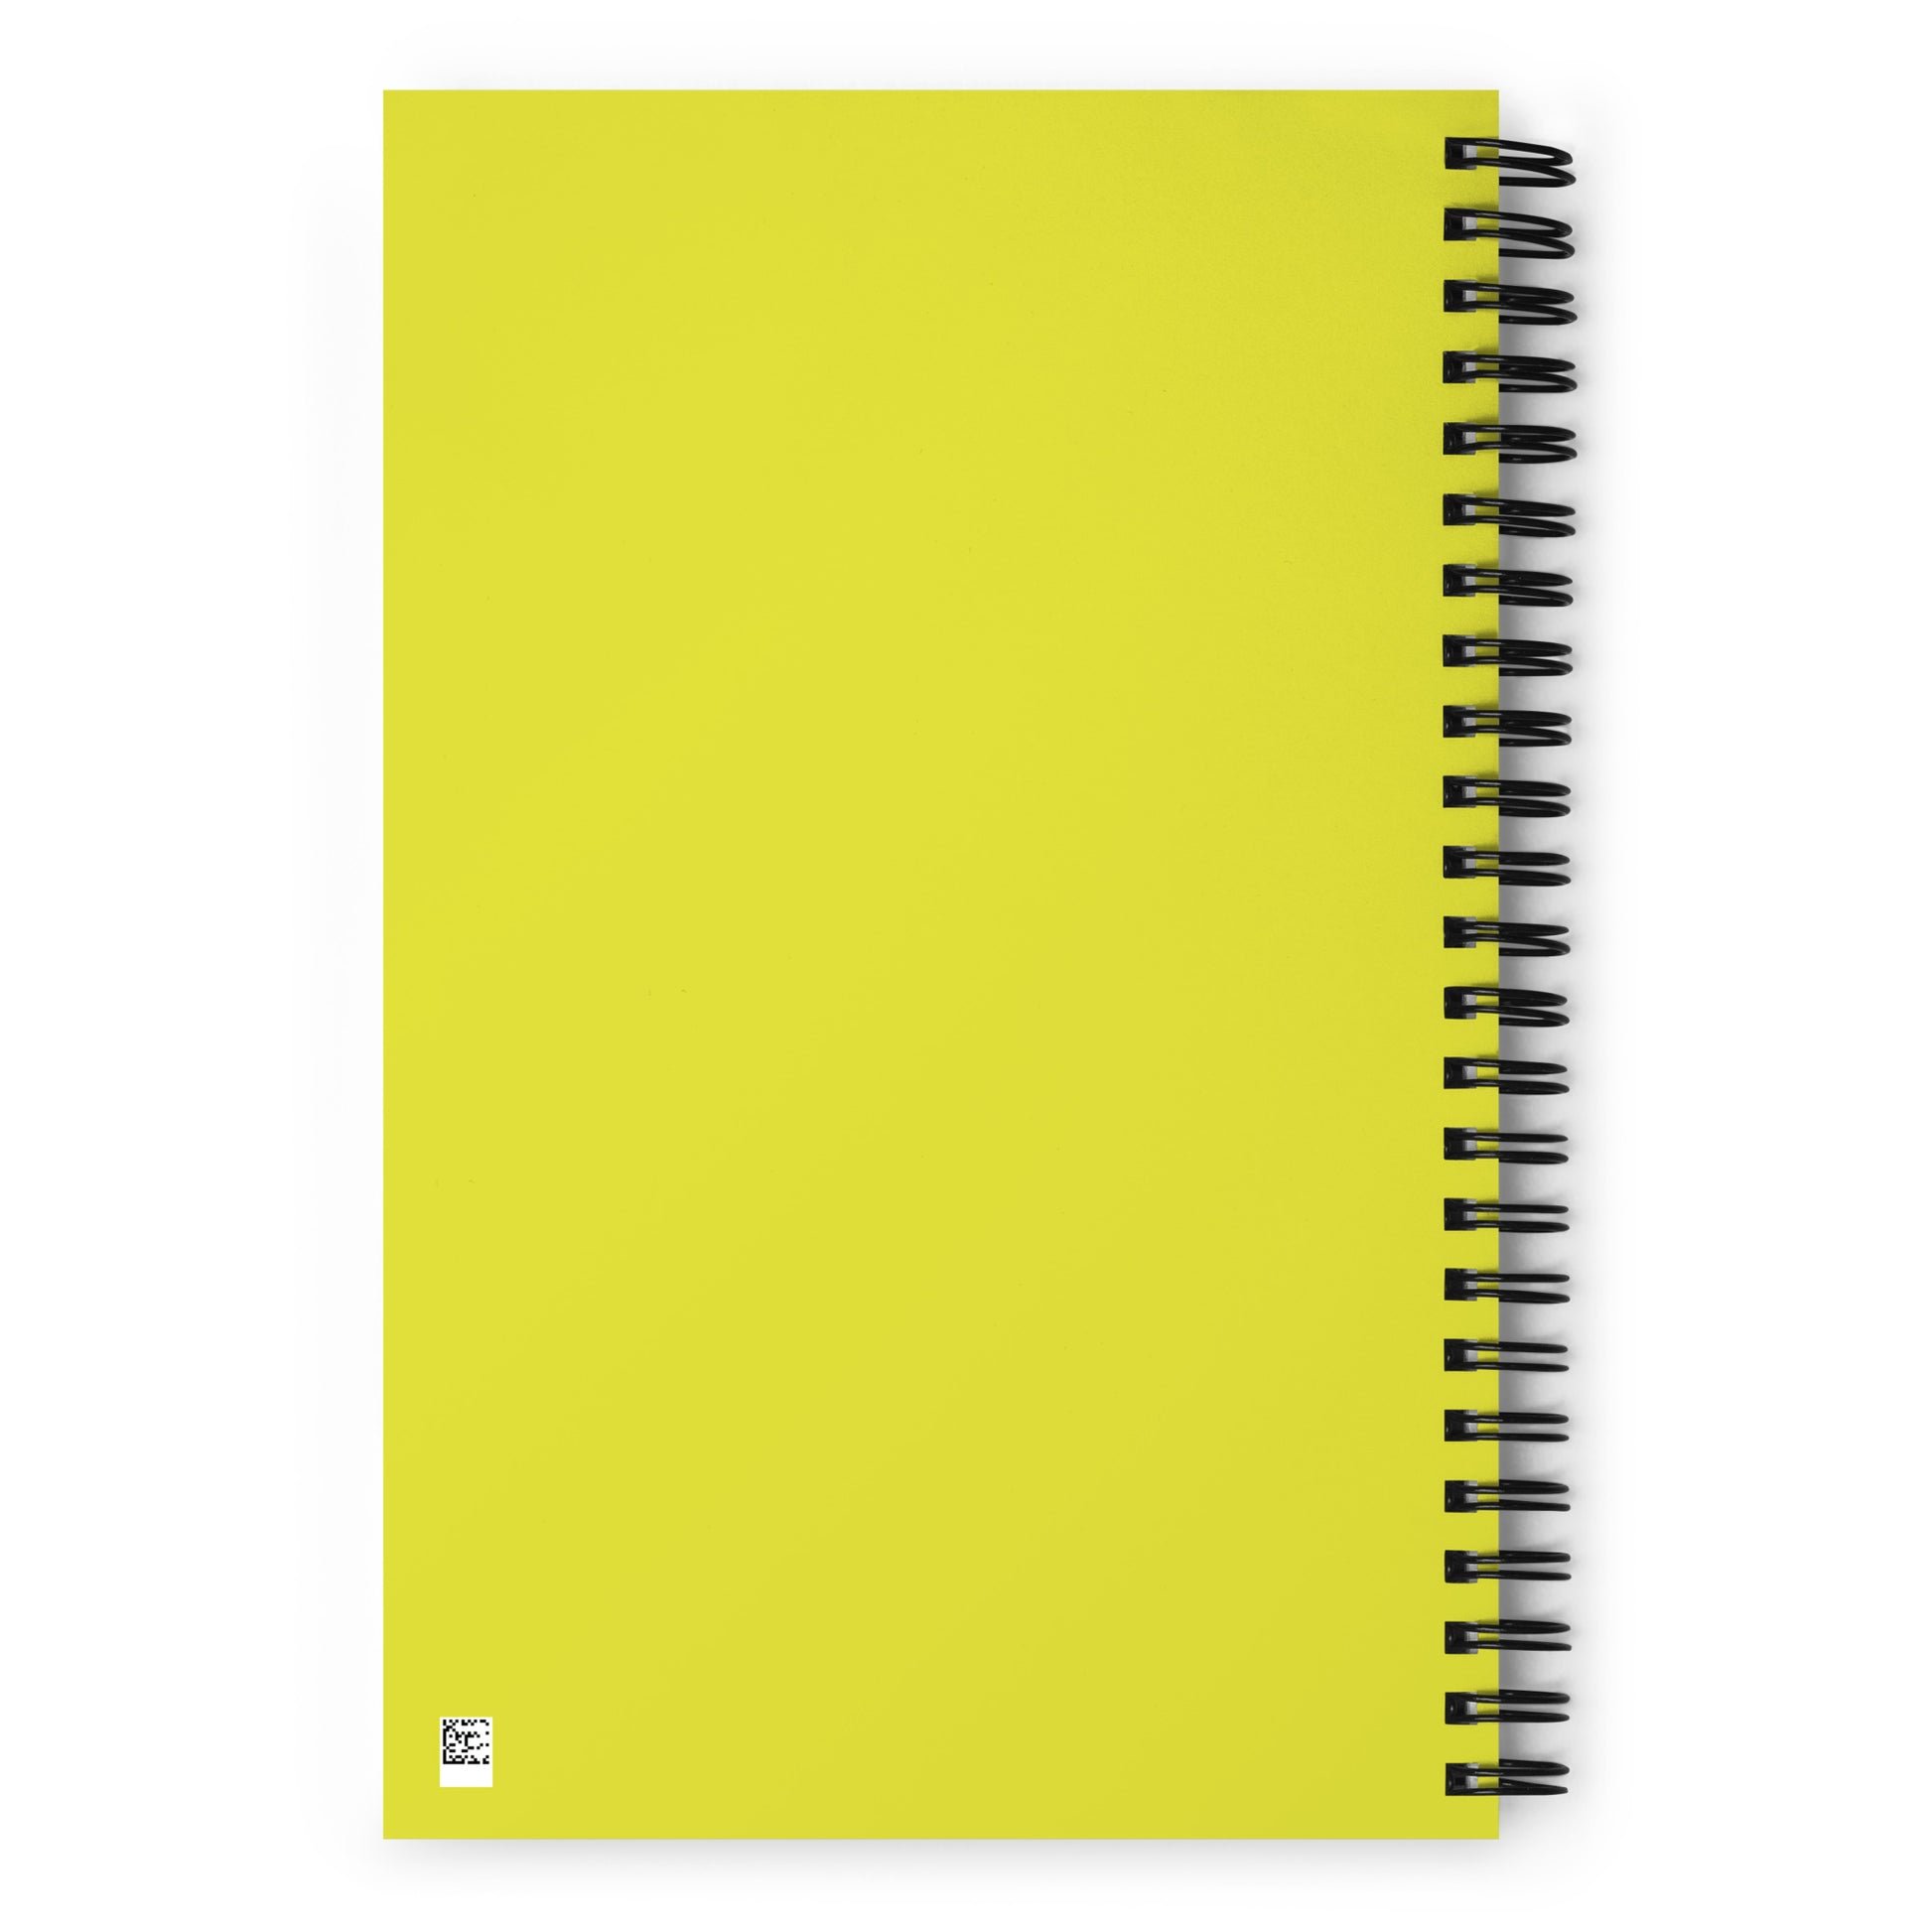 Aviation Gift Spiral Notebook - Yellow • YCM St. Catharines • YHM Designs - Image 02